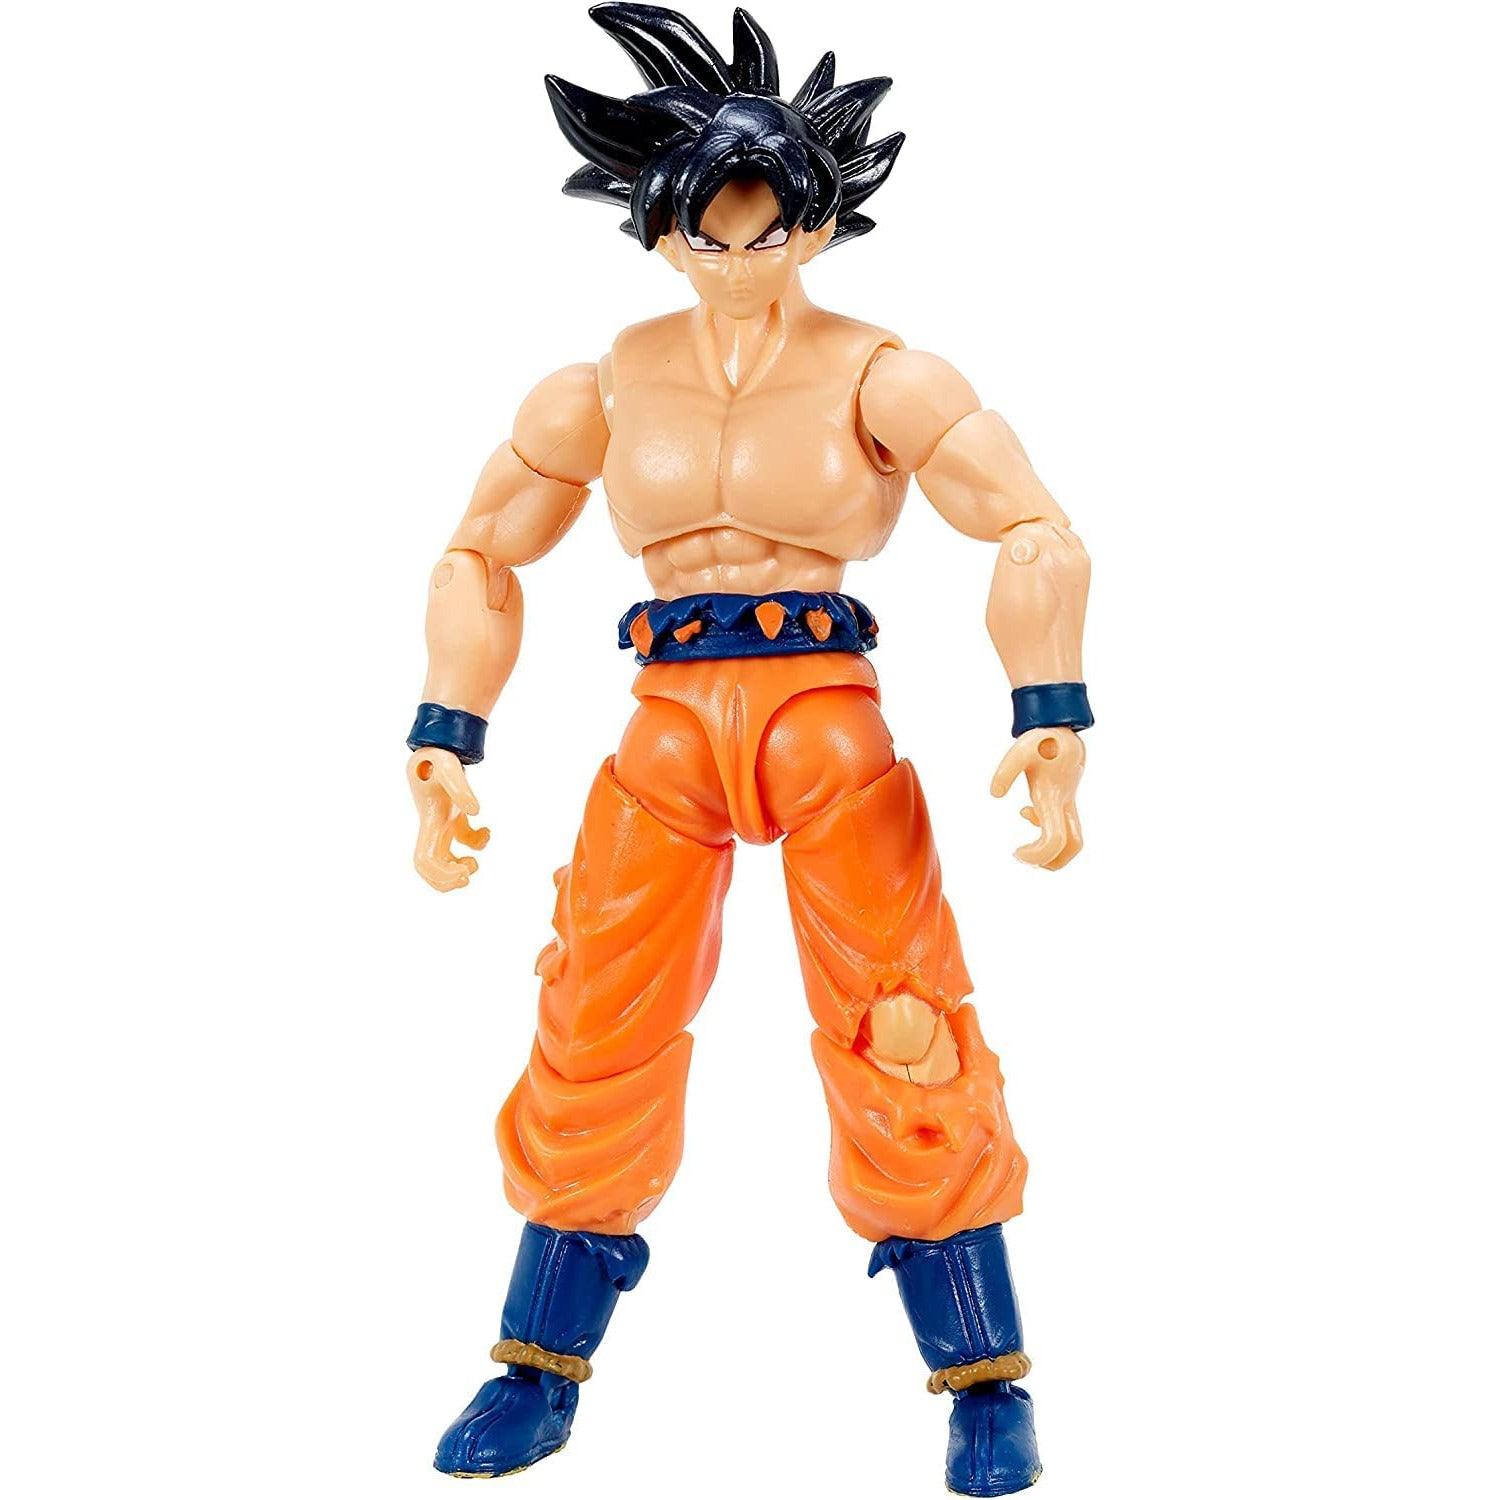 Dragon Ball Evolve 5 Action Figure Bandai America - Ultra Instinct Goku - BumbleToys - 6+ Years, 6-8 years, Action Figures, Boys, Characters, Figures, OXE, Pre-Order